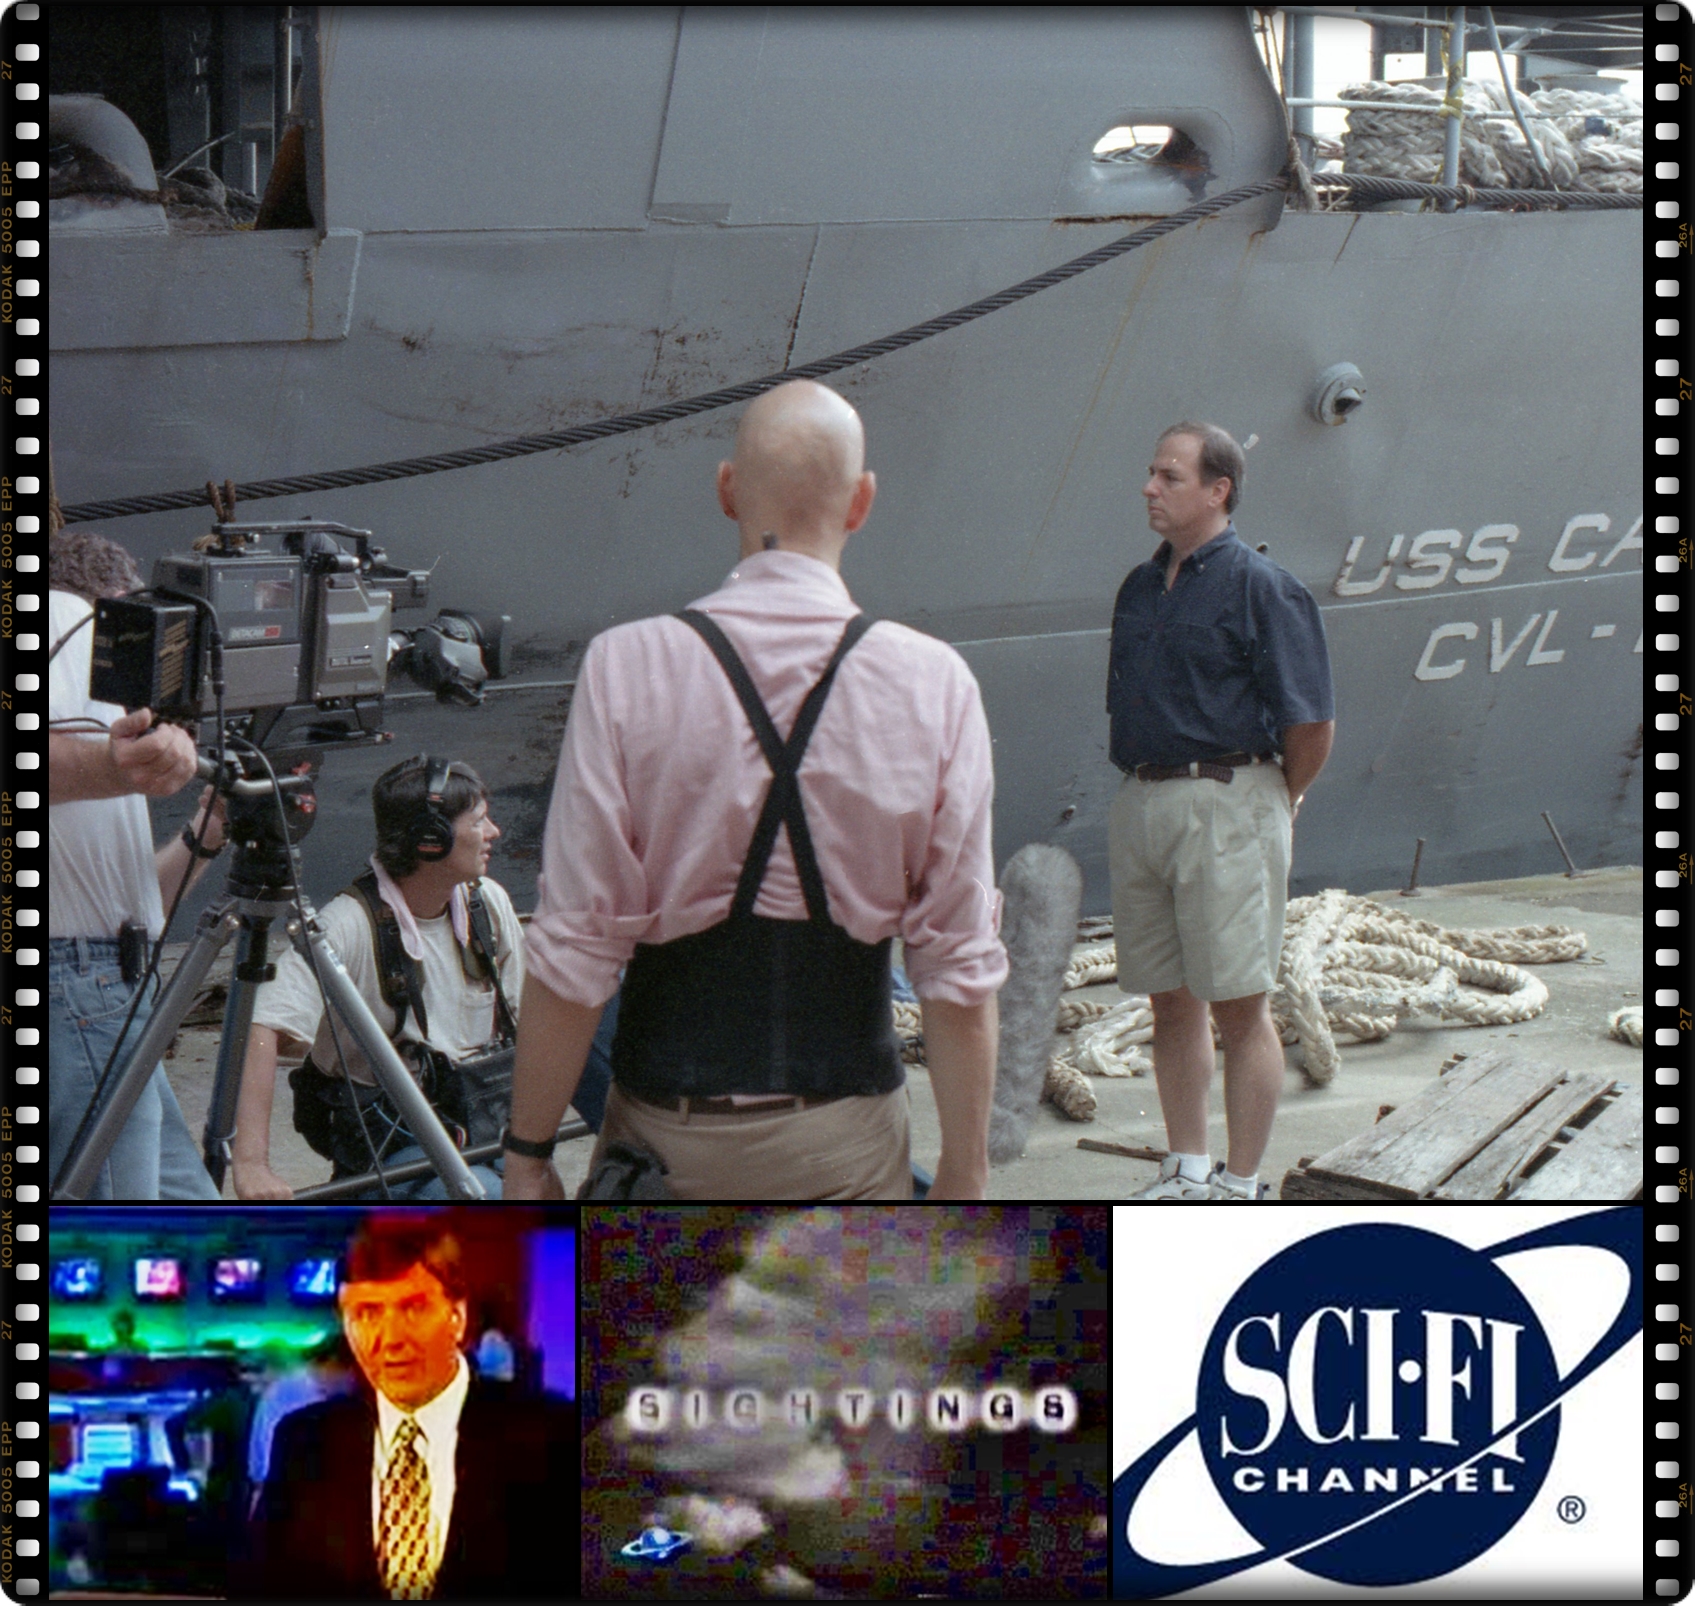 August 1996 - Larry Montz filming for SIGHTINGS on Scifi (now SYFY), Episode # 5054: THE IRON WOMAN - Investigation of USS CABOT (1st aired October 11, 1996). The World War II ship has now been scrapped.